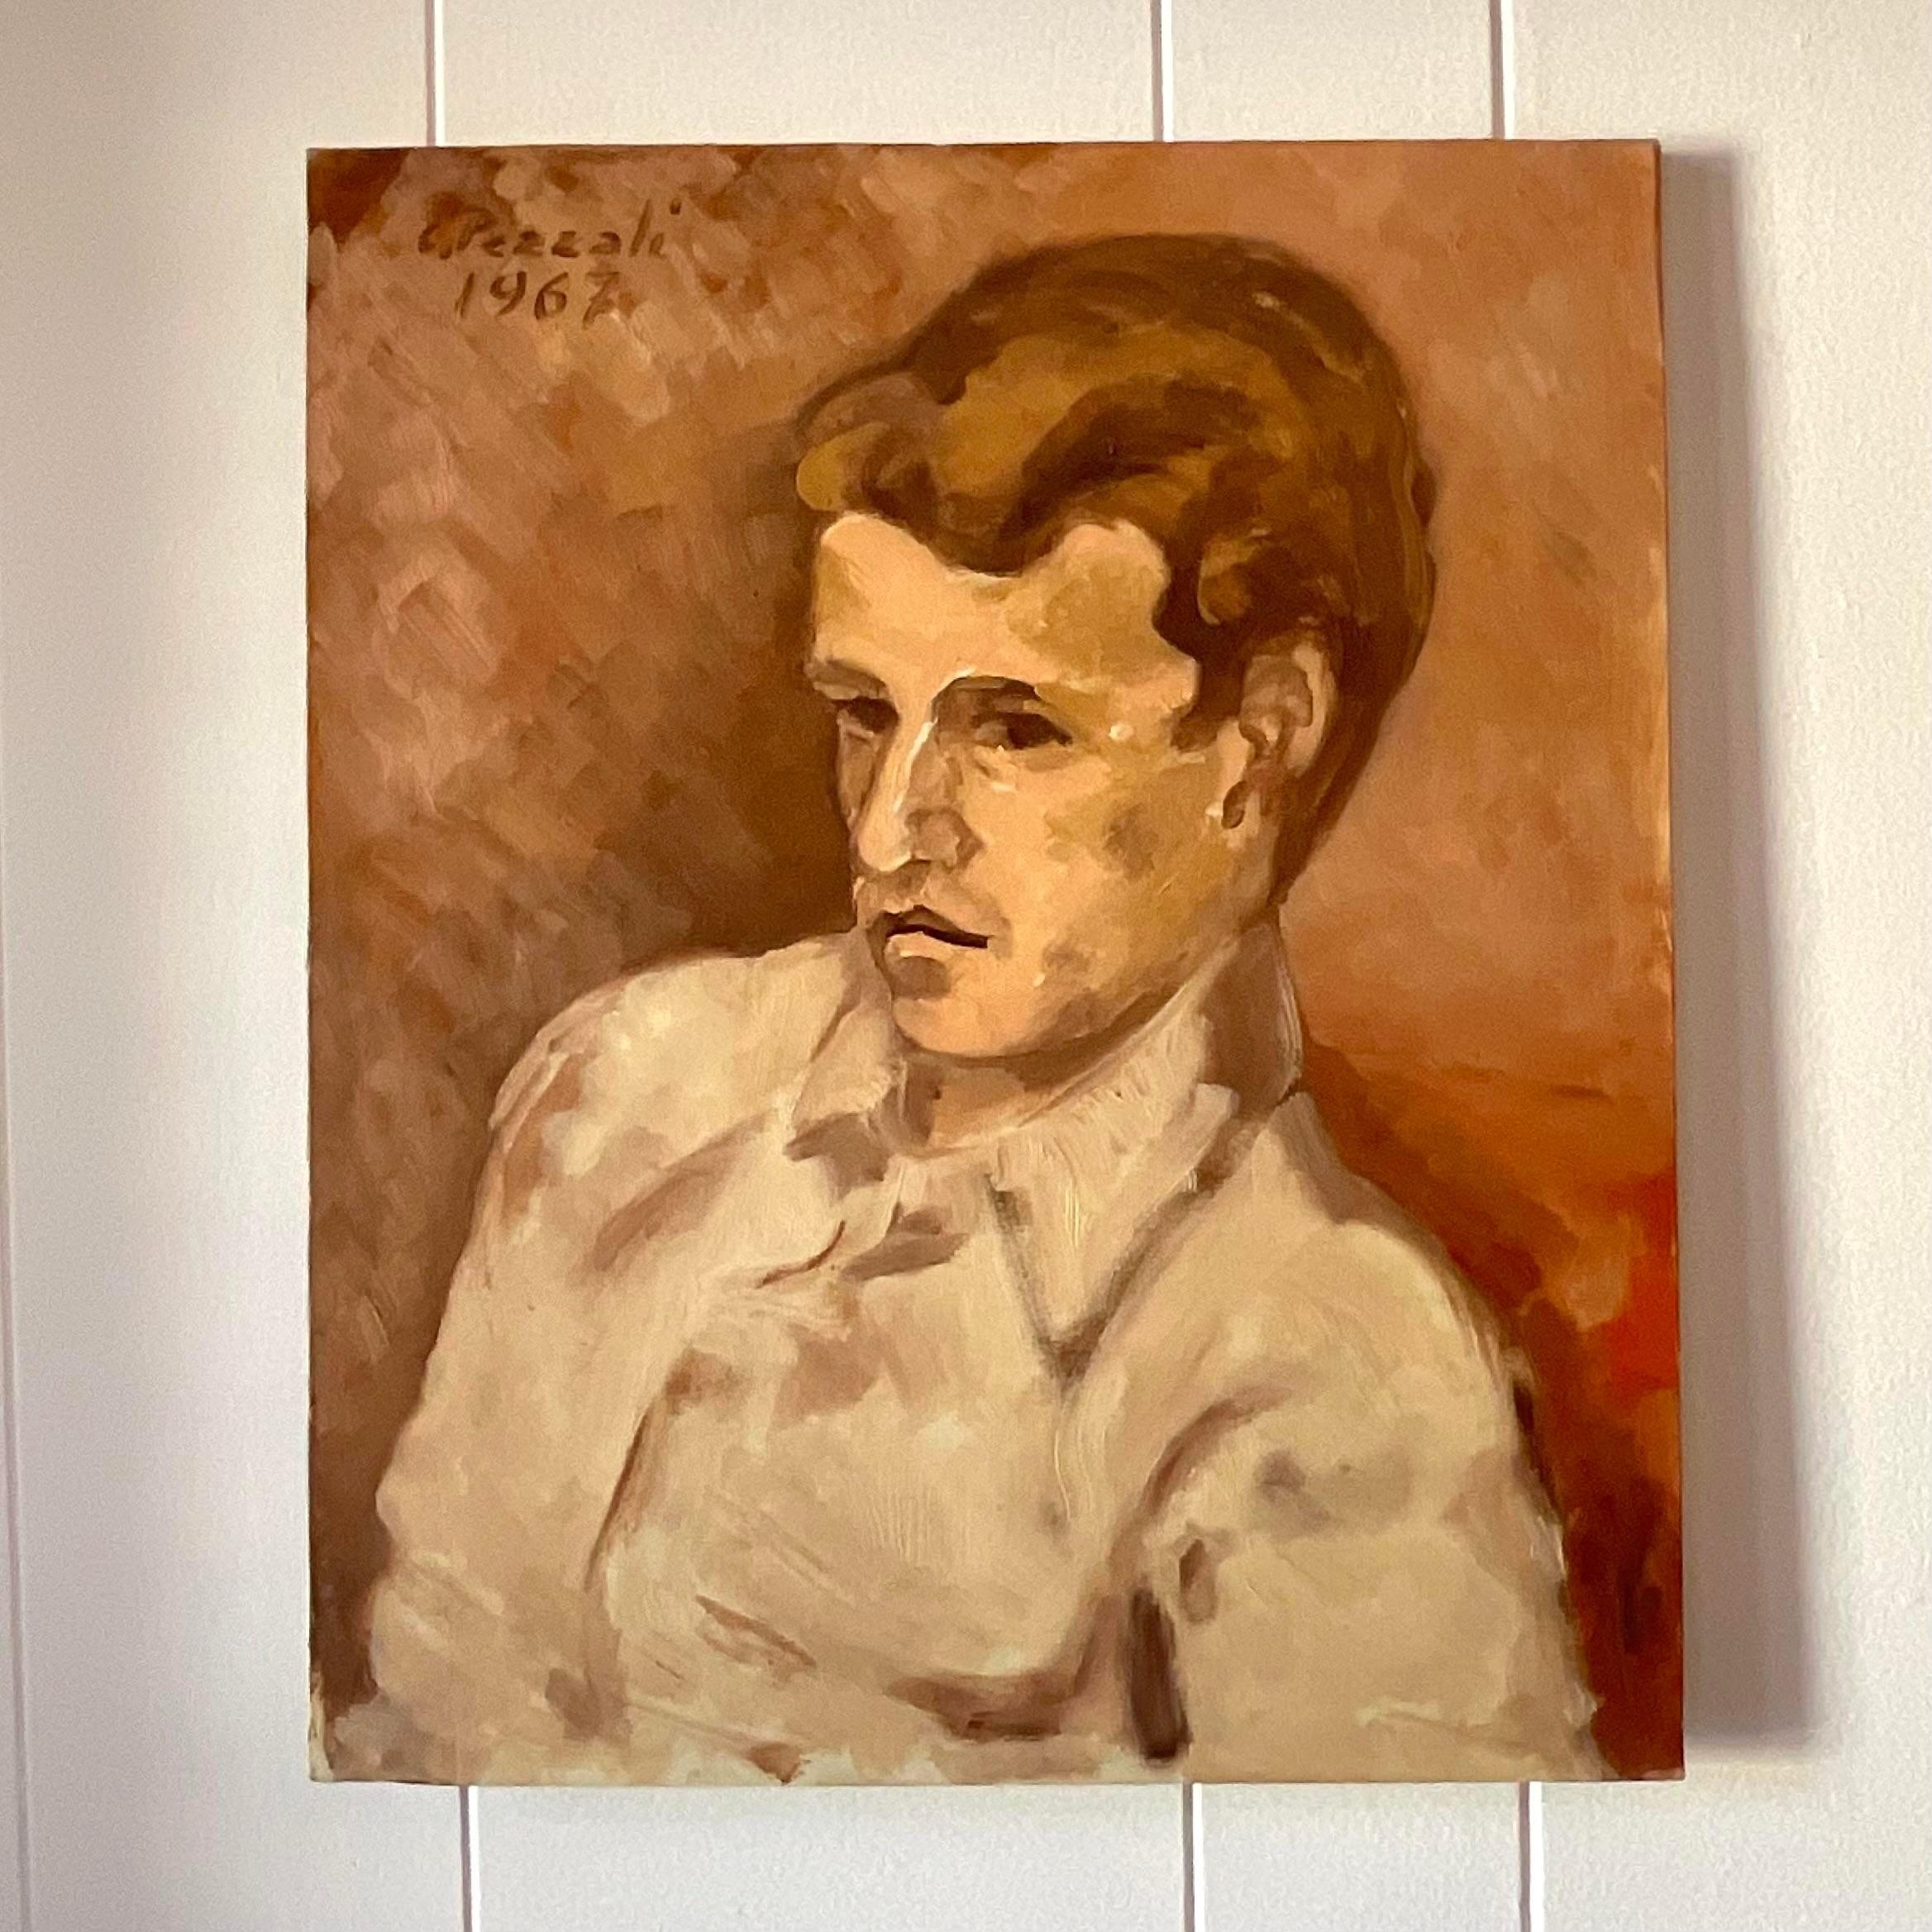 A fabulous vintage original oil portrait on canvas. A chic portrait of a young man. Purchased in Italian and brought to the states. Signed and dated by the artist 1962